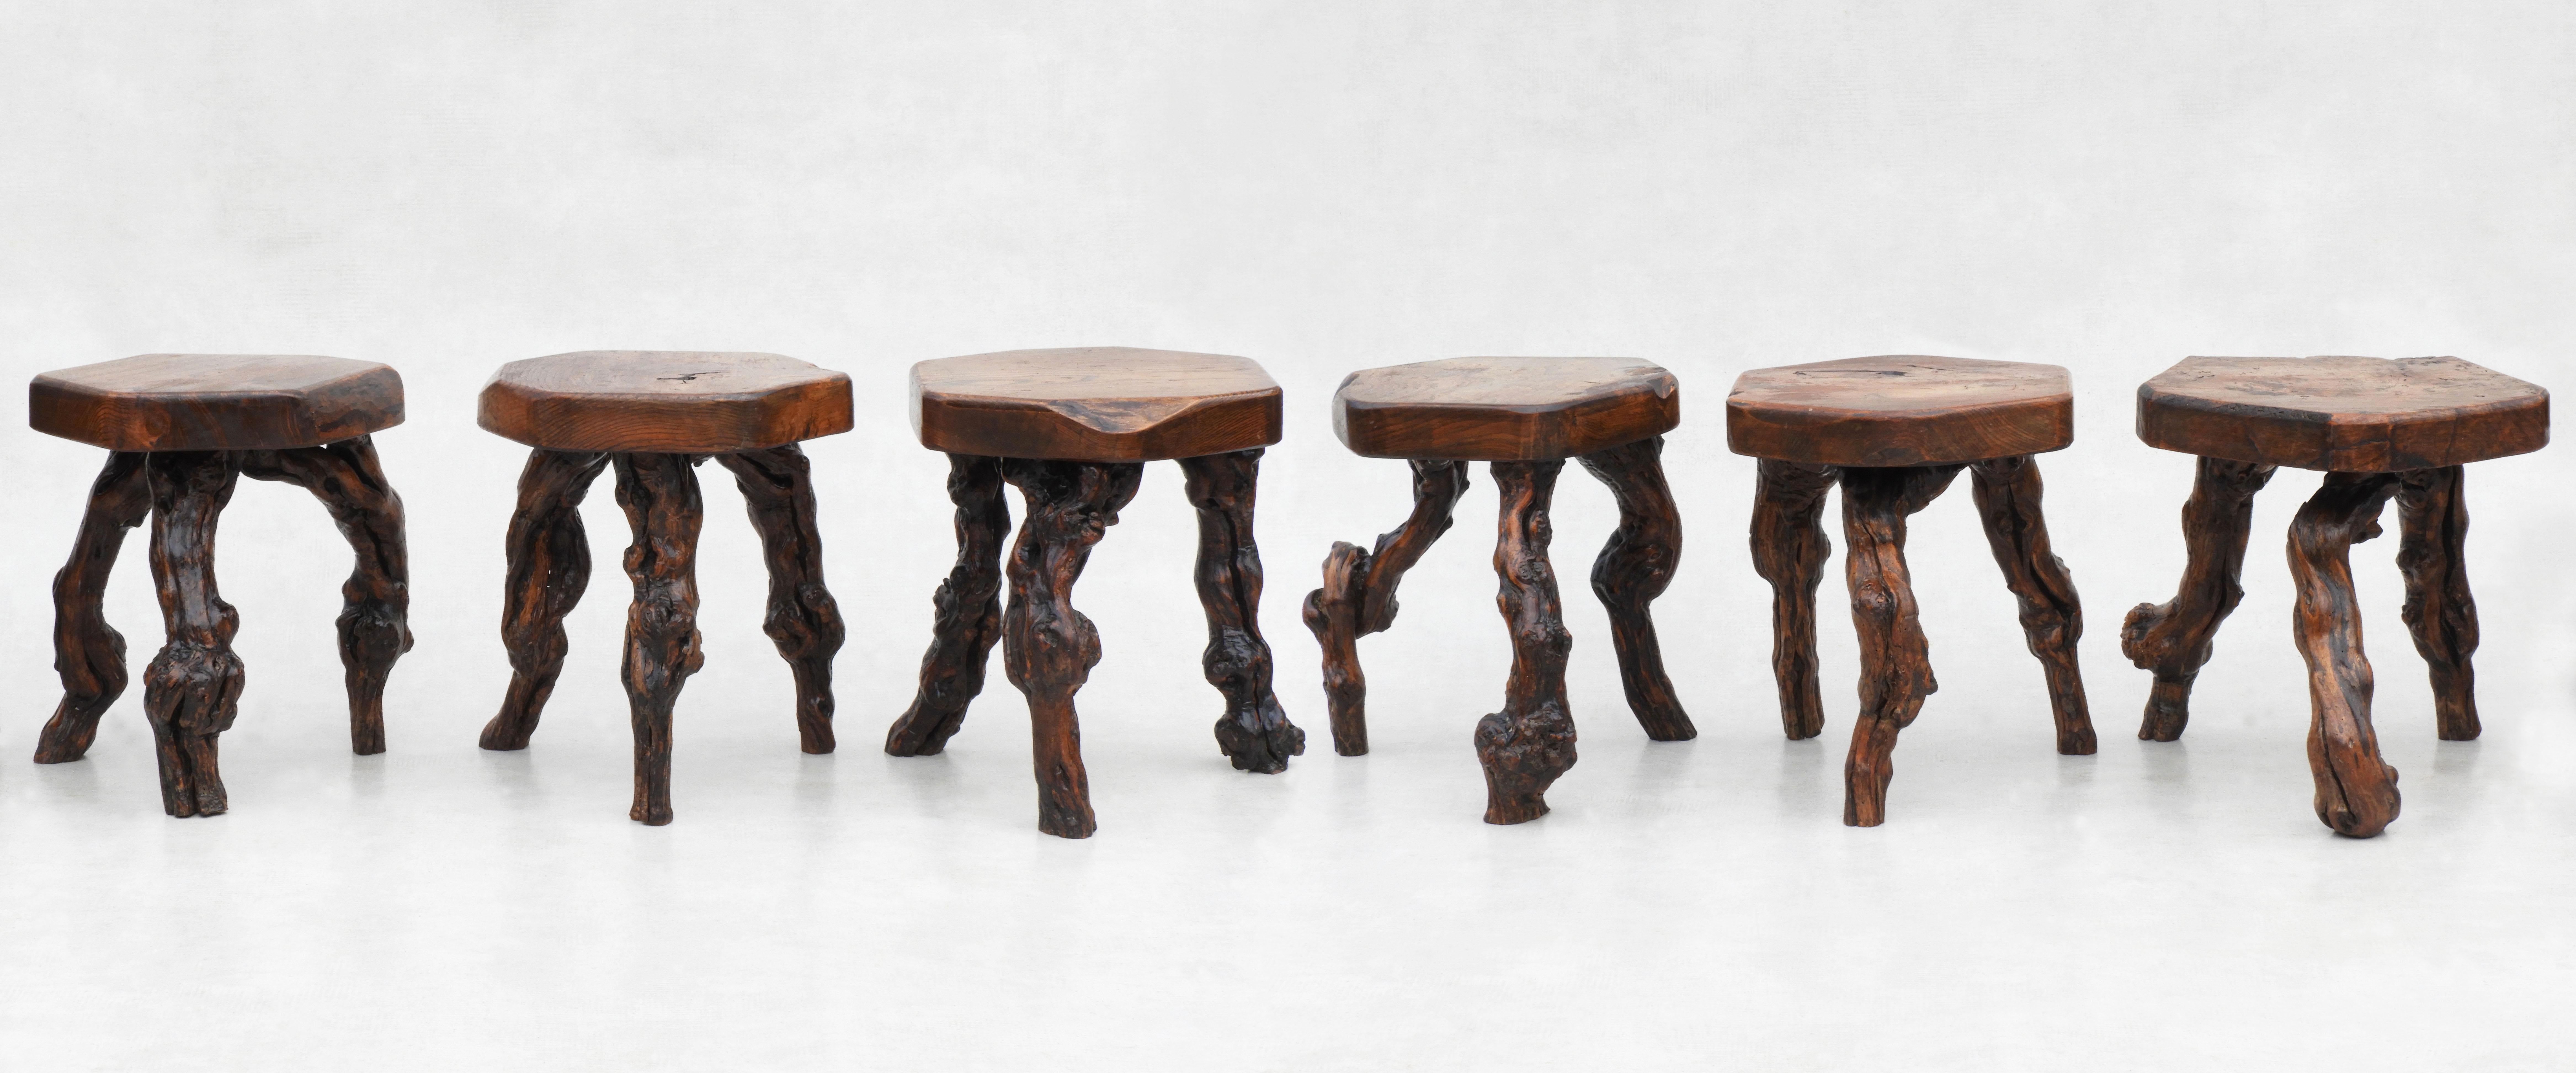 A fabulous set of grapevine tripod stools from c1950s France. Six French Brutalist style tabouret seats, each one individually handcrafted and totally unique. Organic form seating from the Bordeaux wine region of France with solid walnut tops and